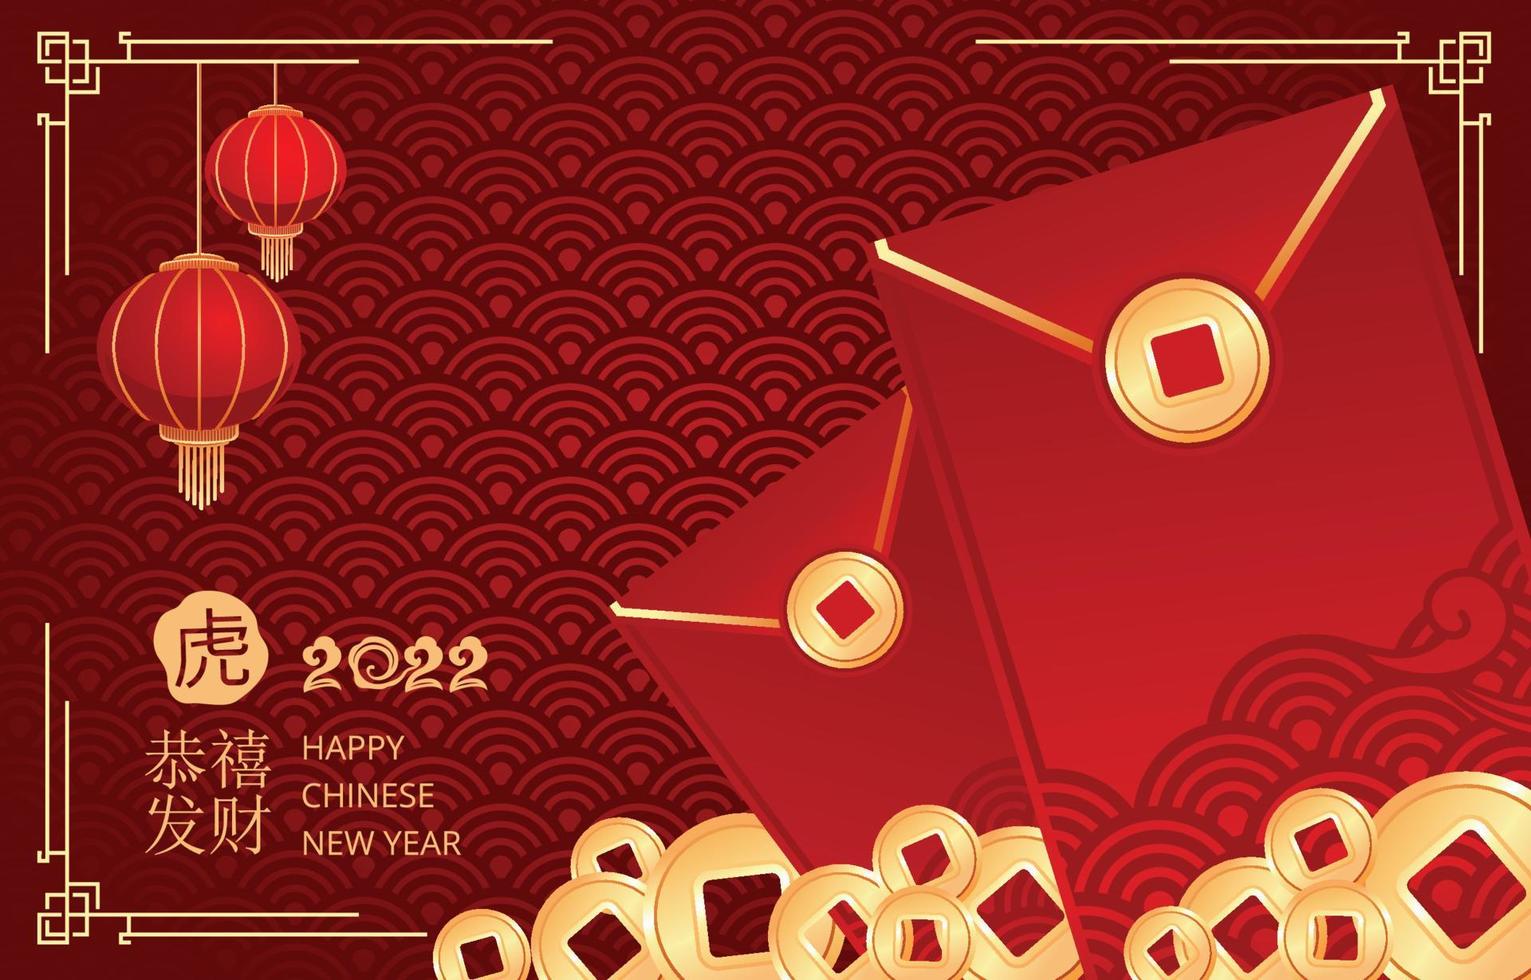 Chinese New Year Red Packet Background vector